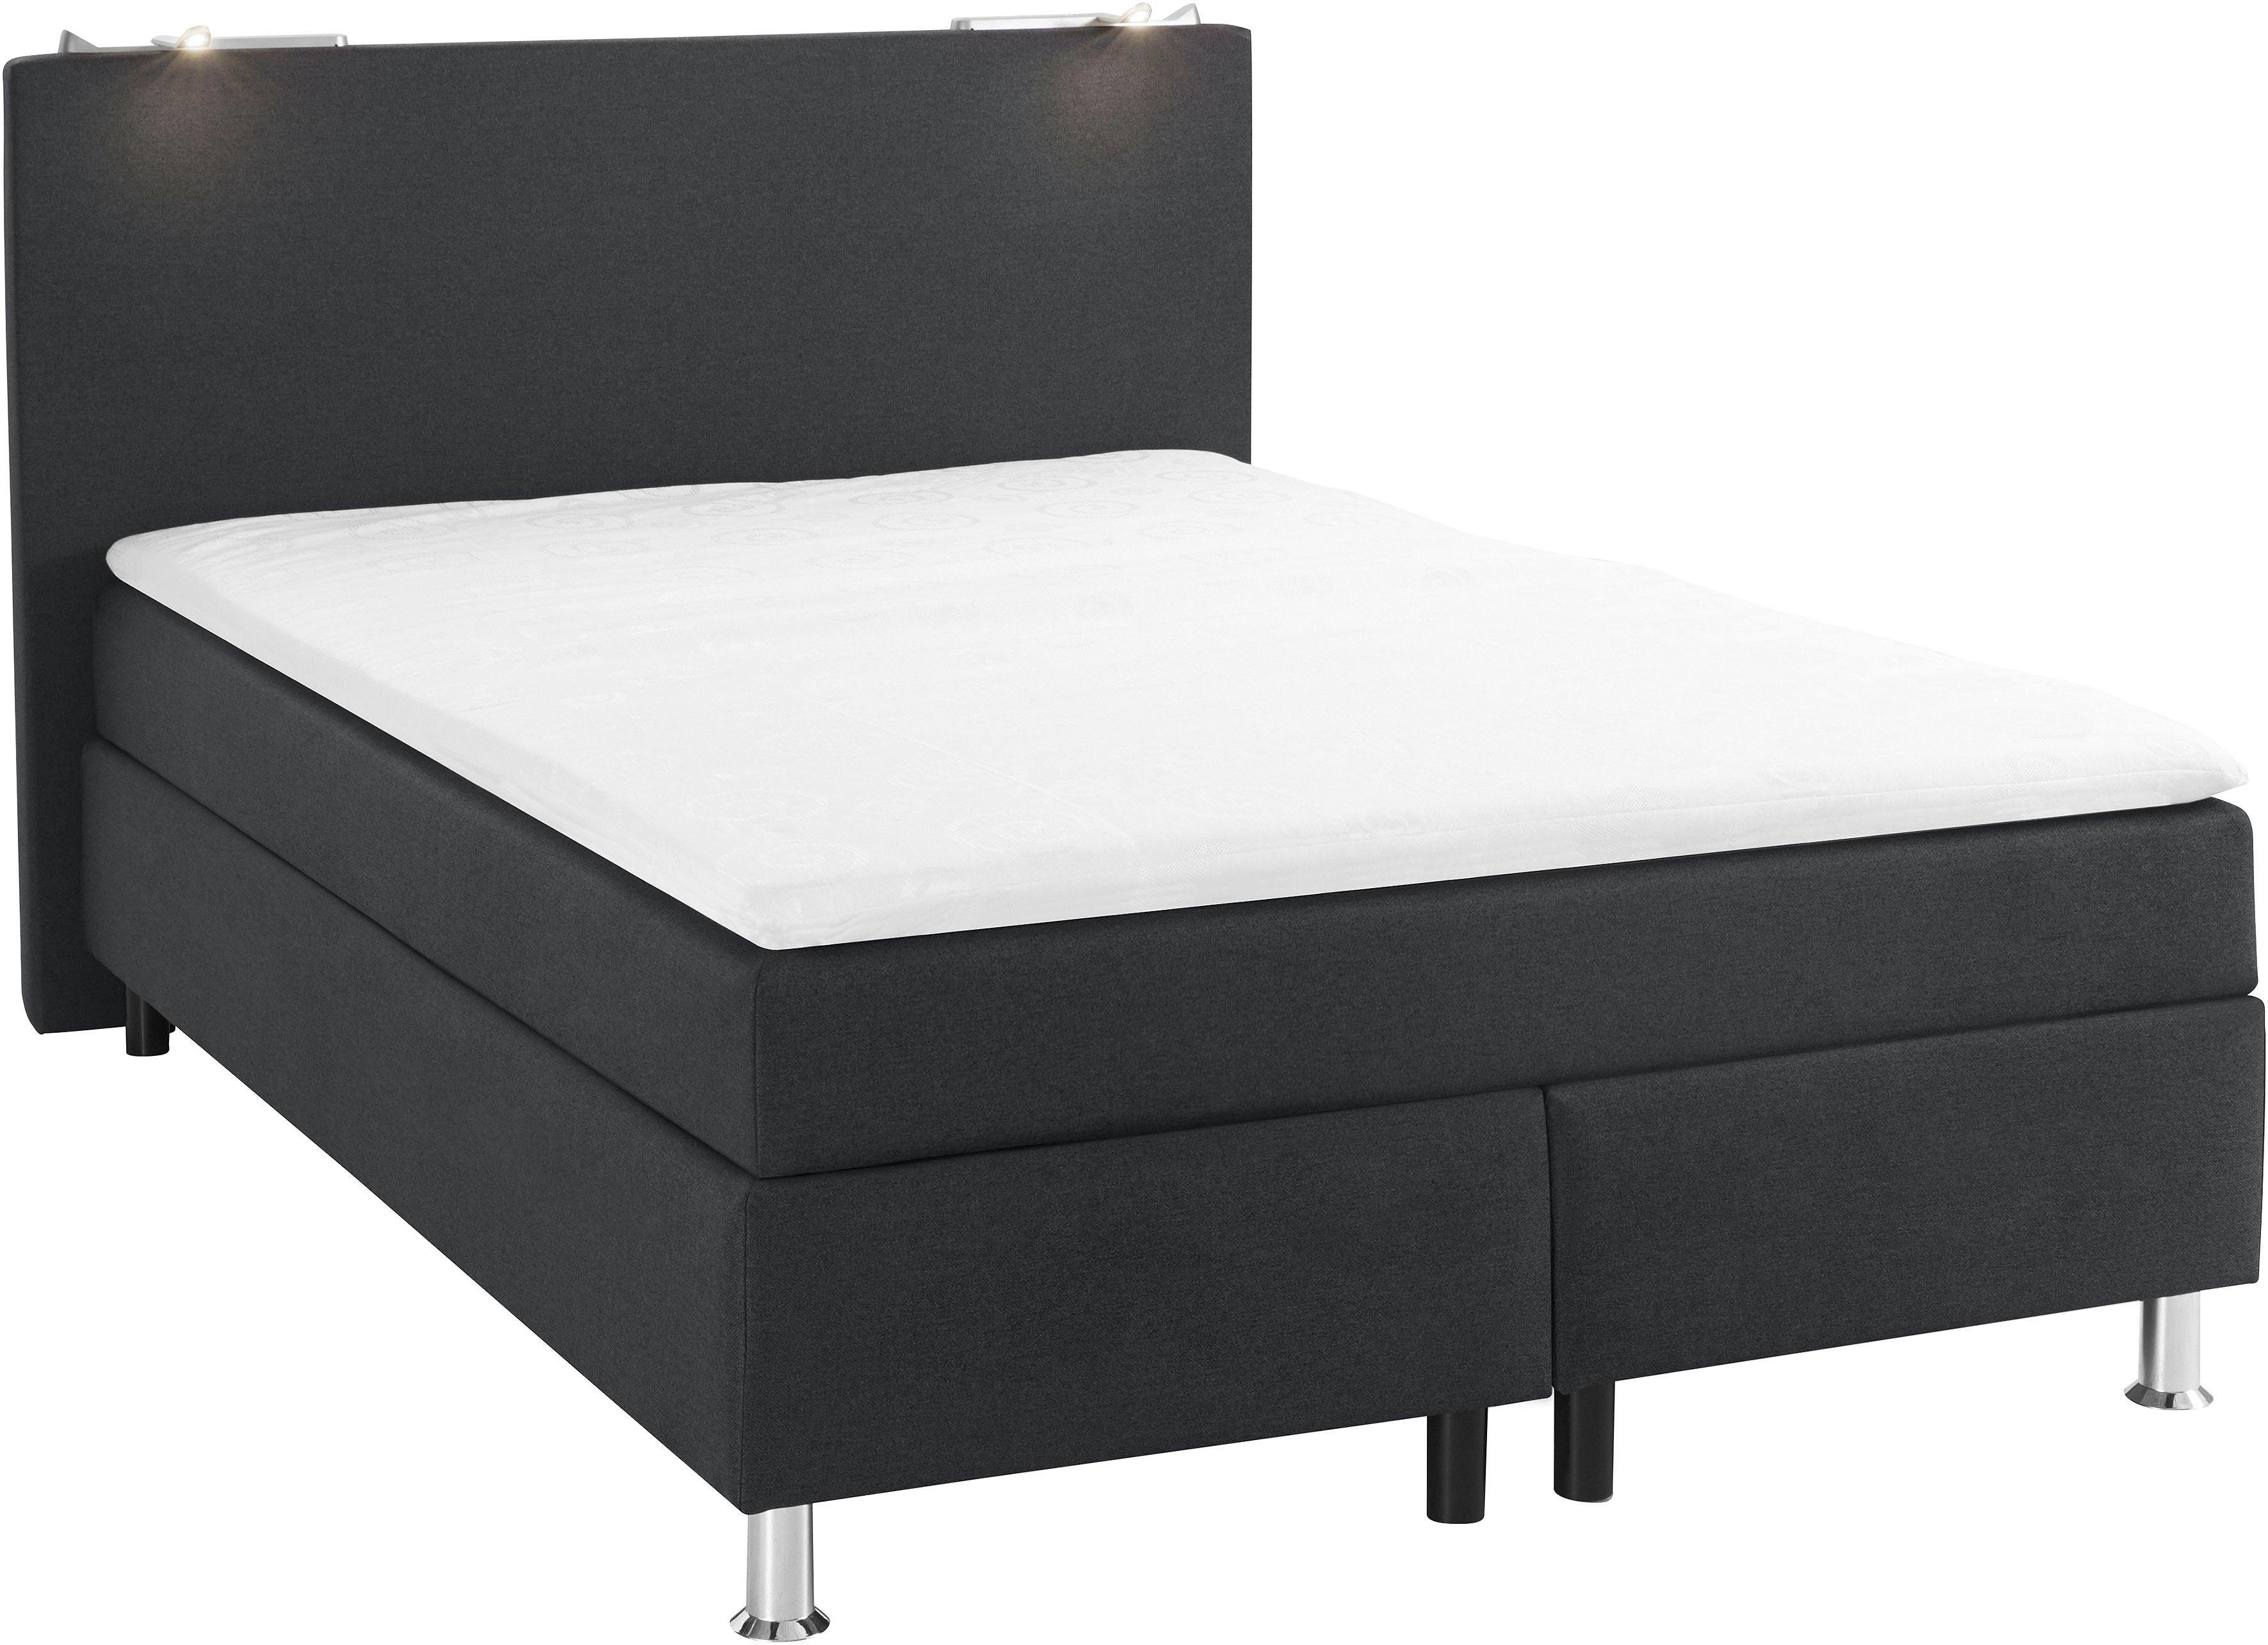 COLLECTION AB Boxspringbett, inkl. LED-Beleuchtung und Topper-kaufen